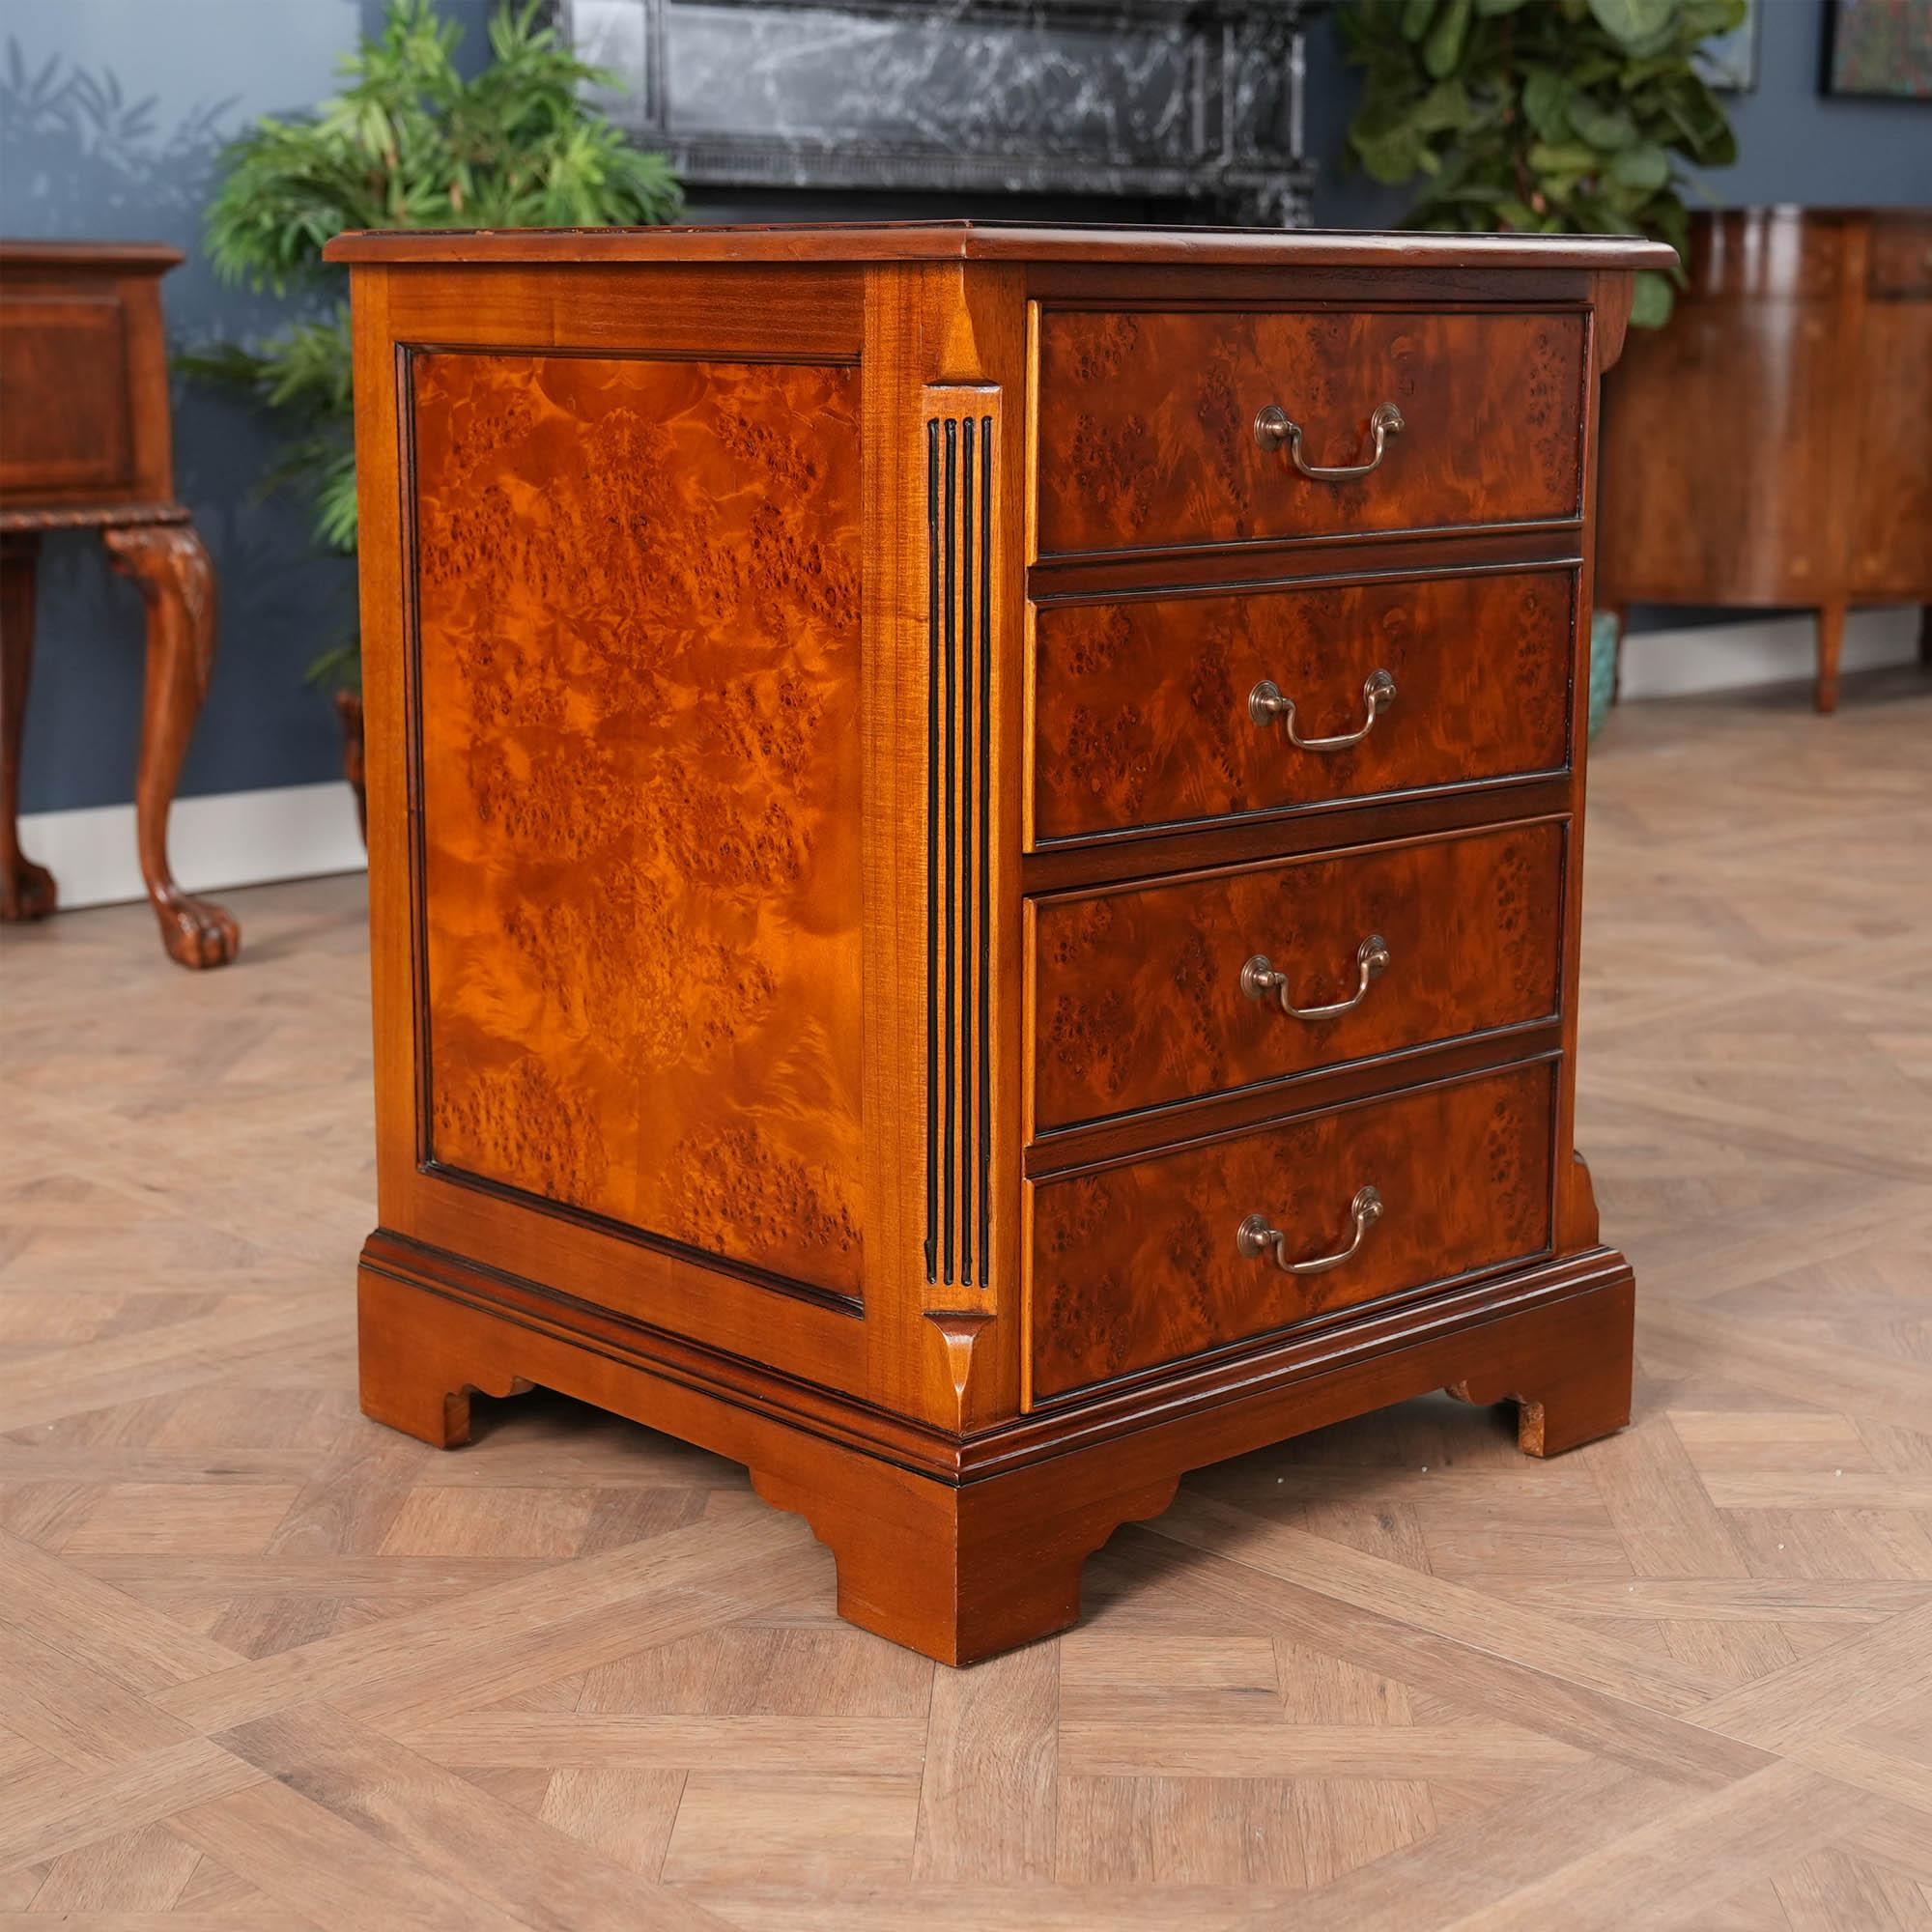 A high quality piece of office furniture from Niagara Furniture our Country Estate Two Drawer File is made from the finest burls available. The top of the cabinet is covered in a full grain brown leather panel which is attractively tooled around the